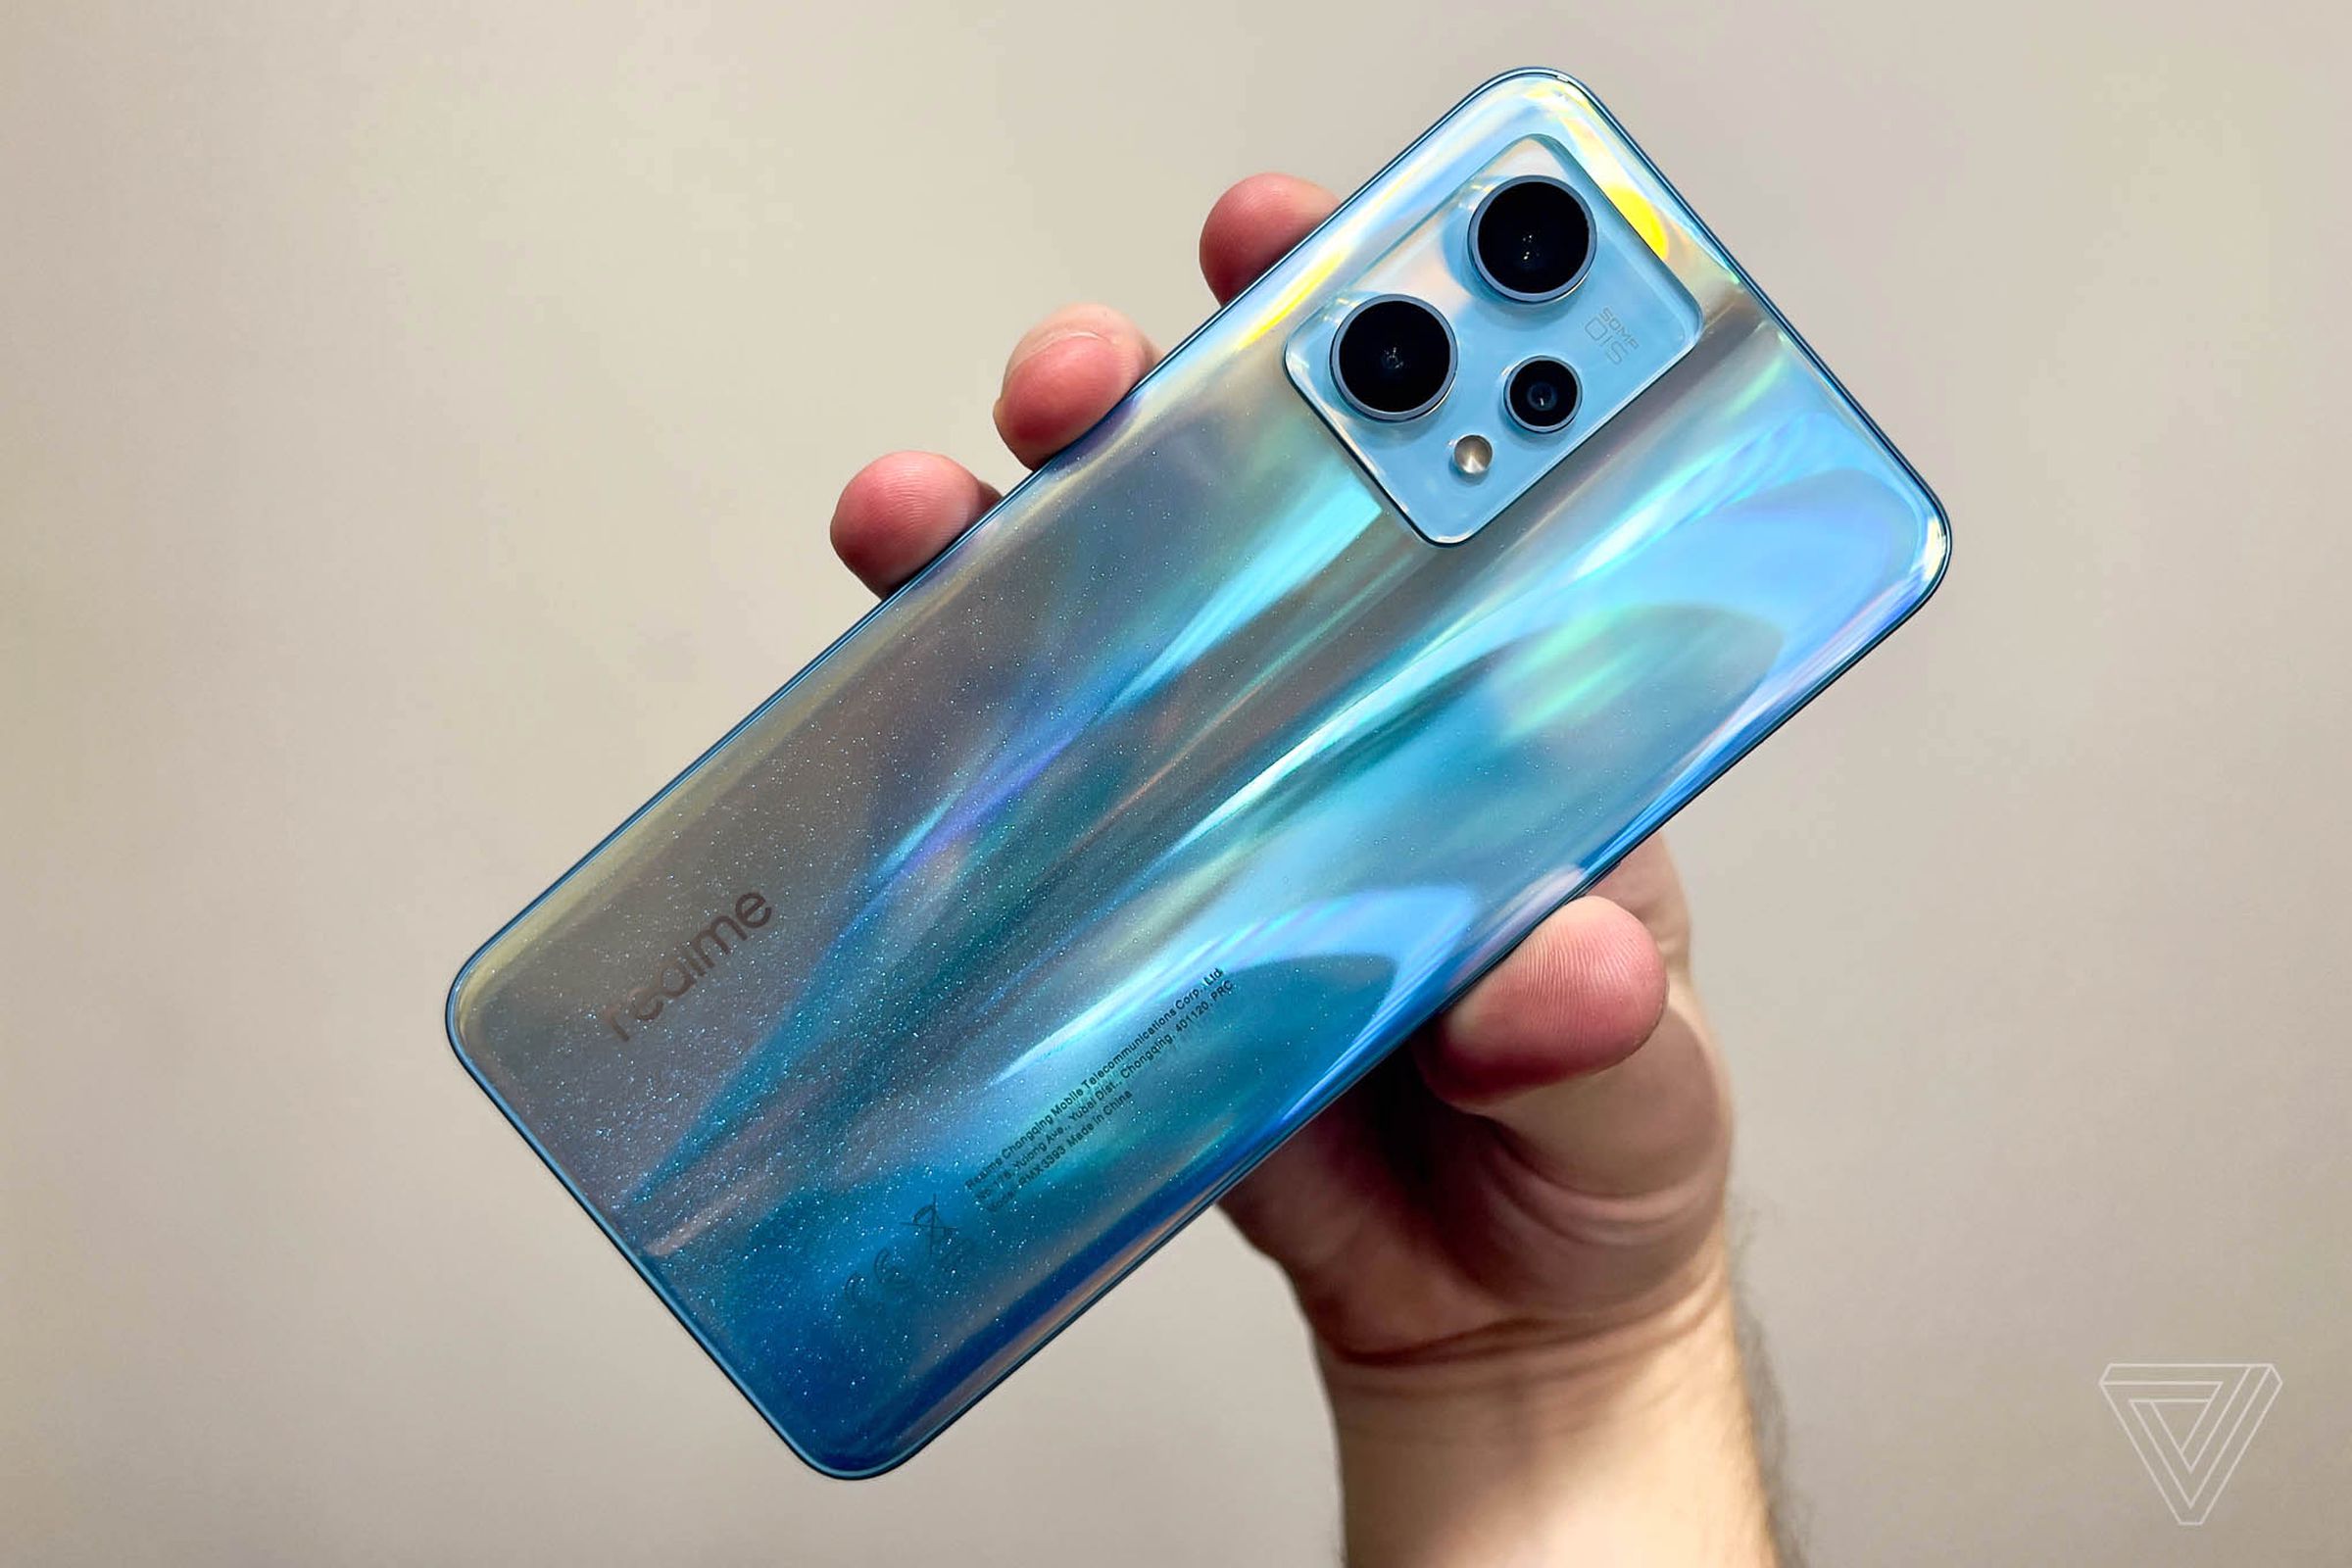 This is the same phone as the one in the first image. It’s blue until you take it outside.